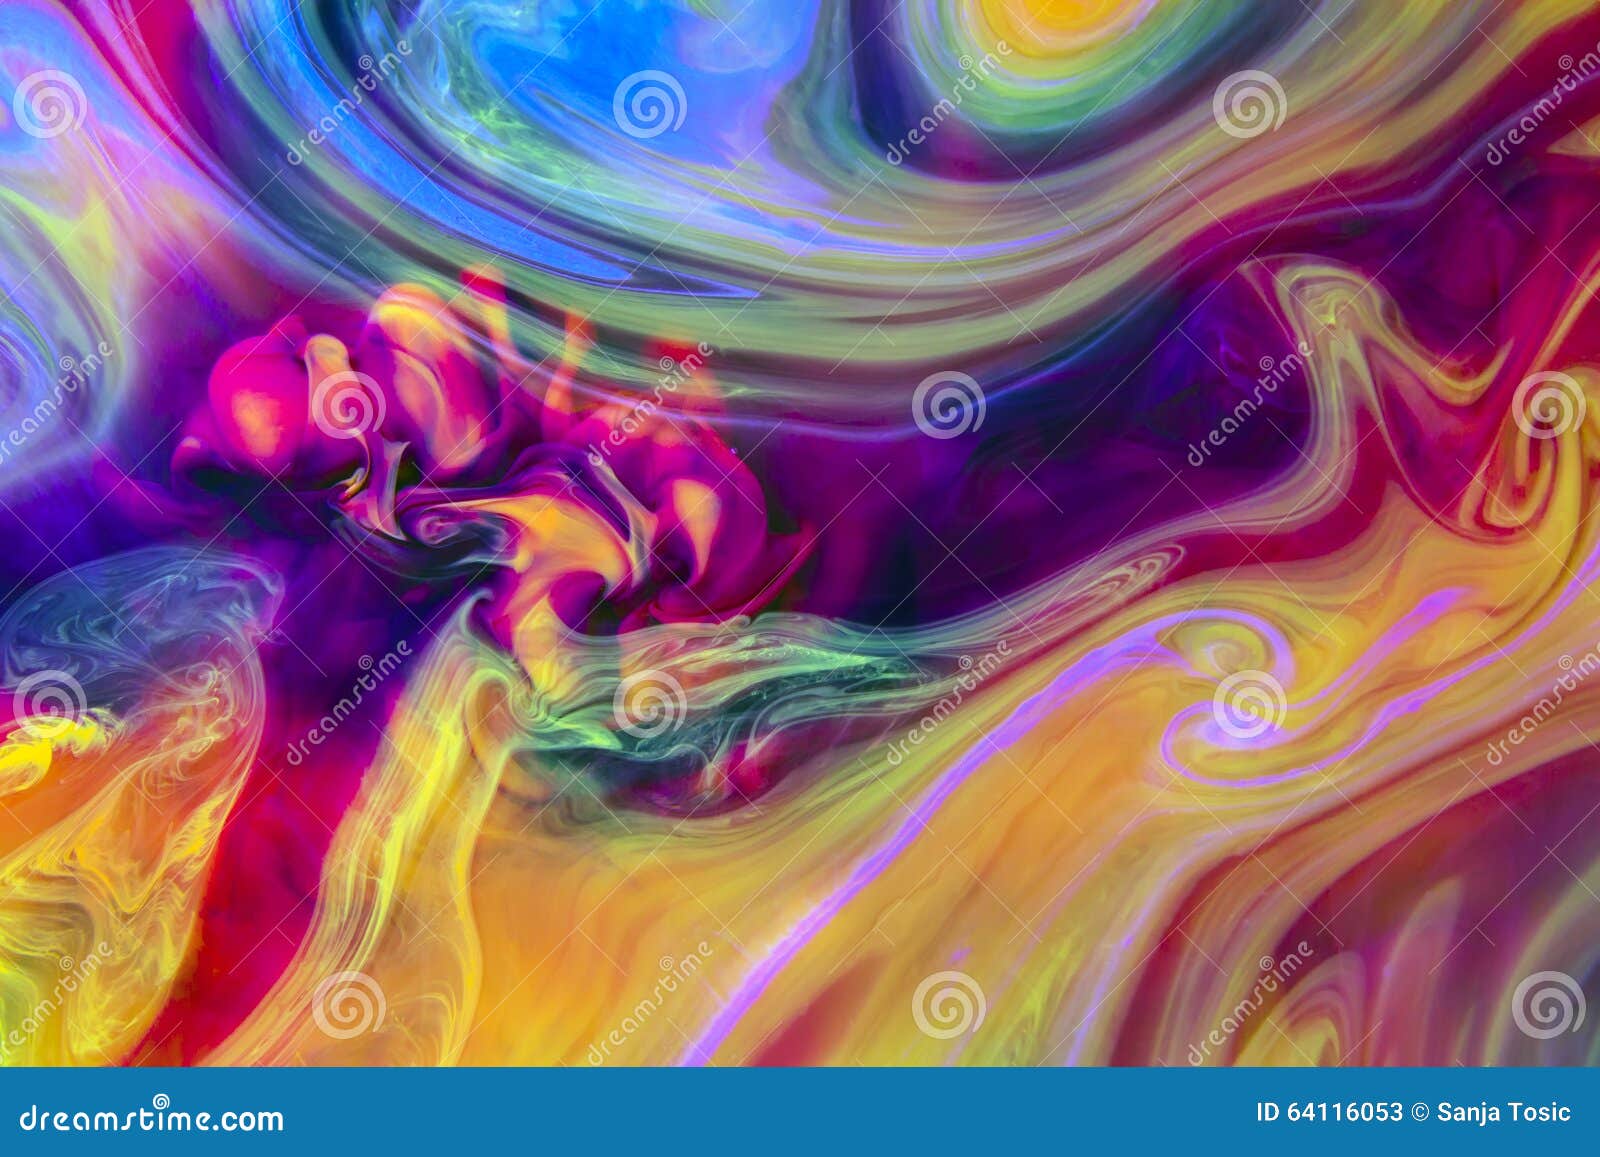 colorful liquids underwater. psychedelic colors.